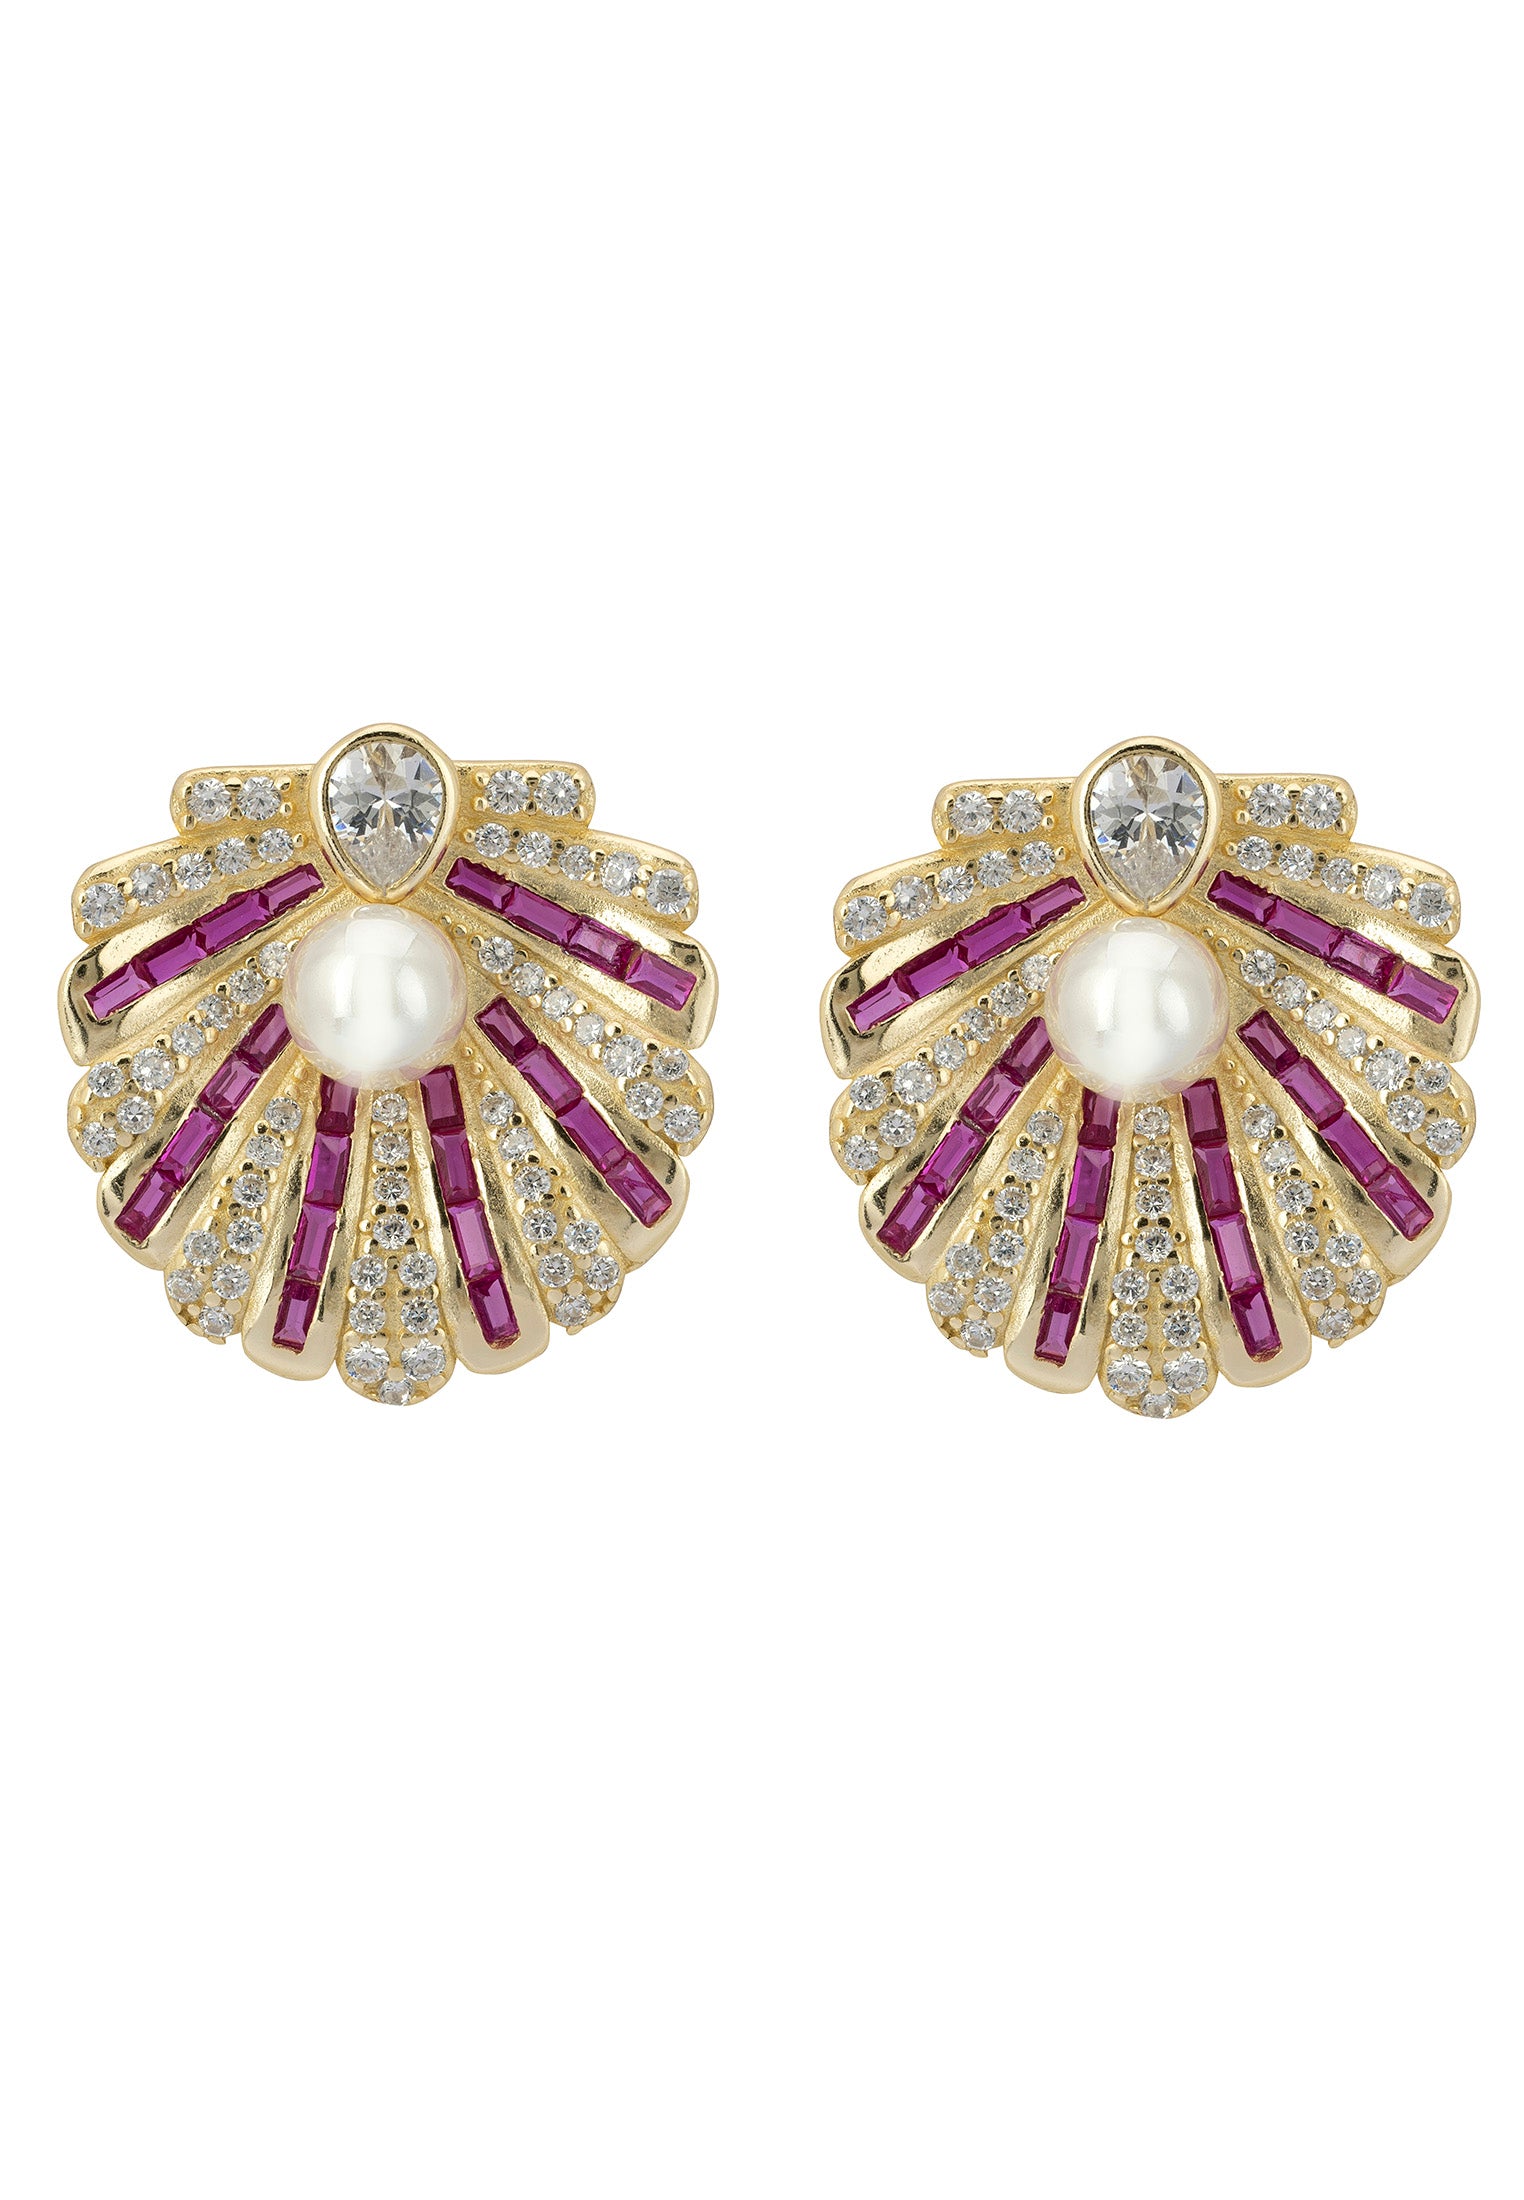 Art Deco Scallop Shell Earrings Ruby Red With Pearl Gold